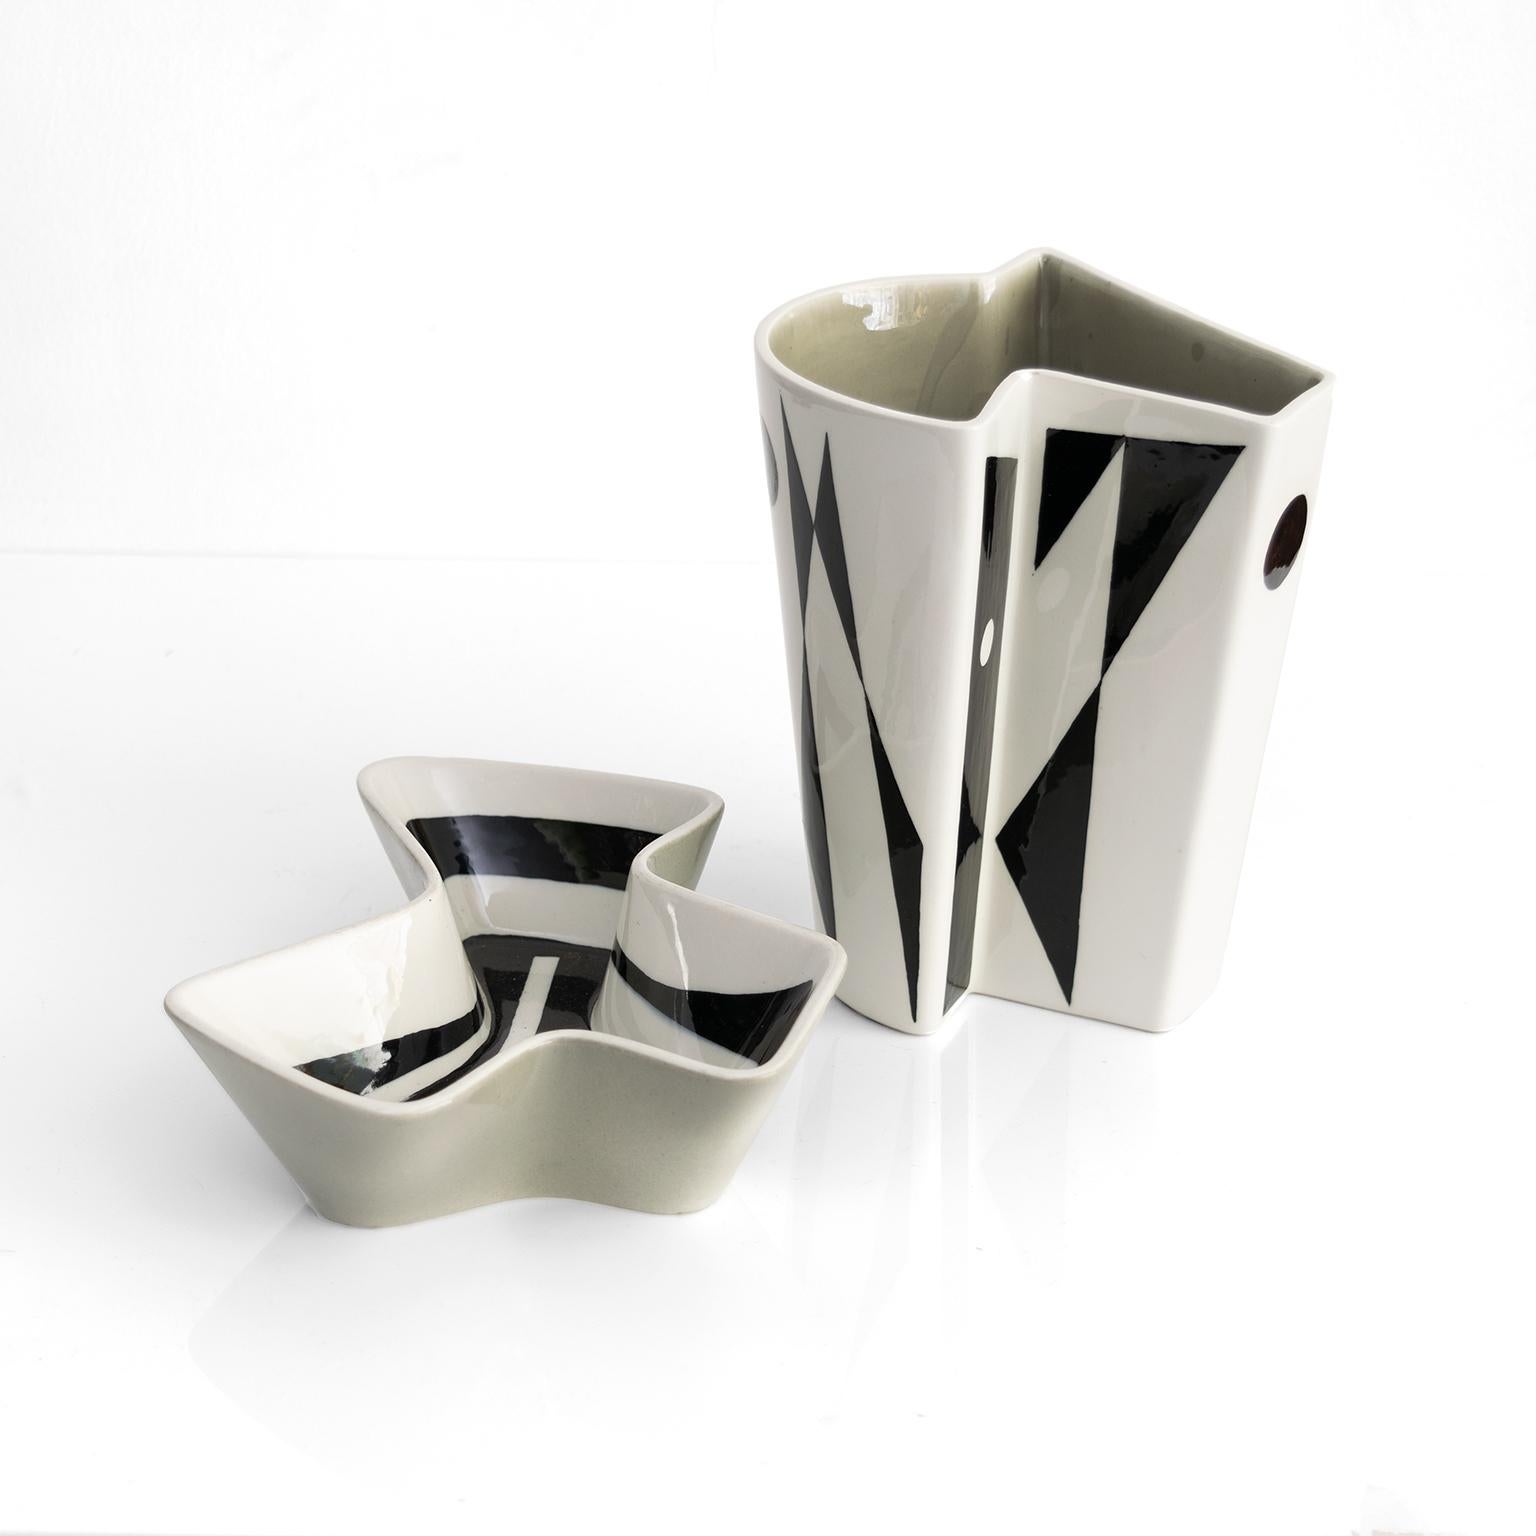 Carl- Harry Stalhane ceramic vase and bowl in angular free-form shapes. Decorated brilliantly with black designs on white and pale gray glazes. Made at Rorstrand, Sweden 1950

Vase: Height 8”, Width: 6”, Depth: 5”

Bowl: Height: 2.25“ Length: 9“